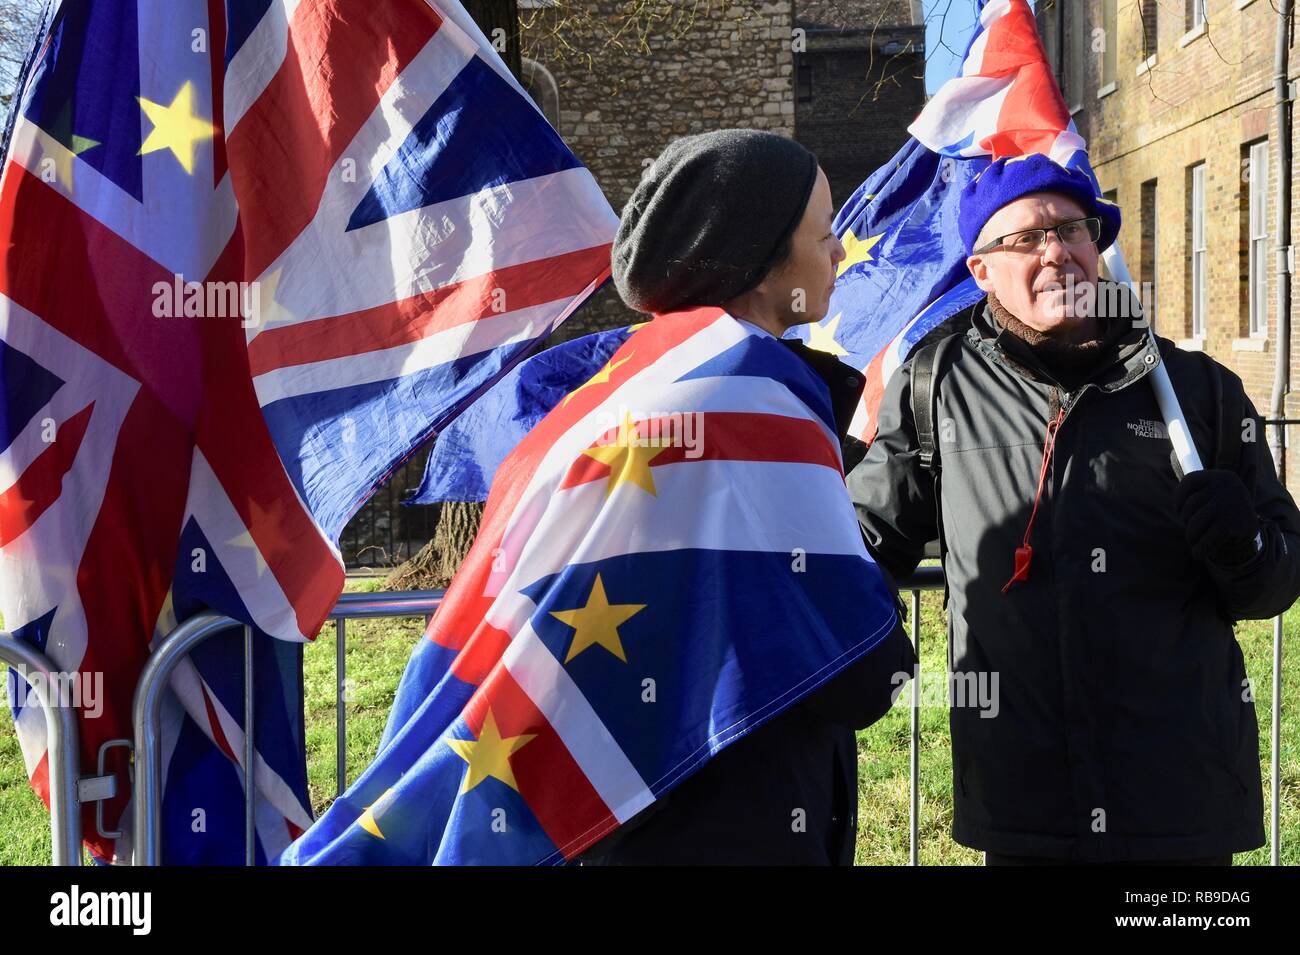 Westminster, London, UK. 8th Jan 2019. Pro EU Remainers demonstrated outside of the Houses of Parliament, Westminster, London.UK Credit: michael melia/Alamy Live News Stock Photo